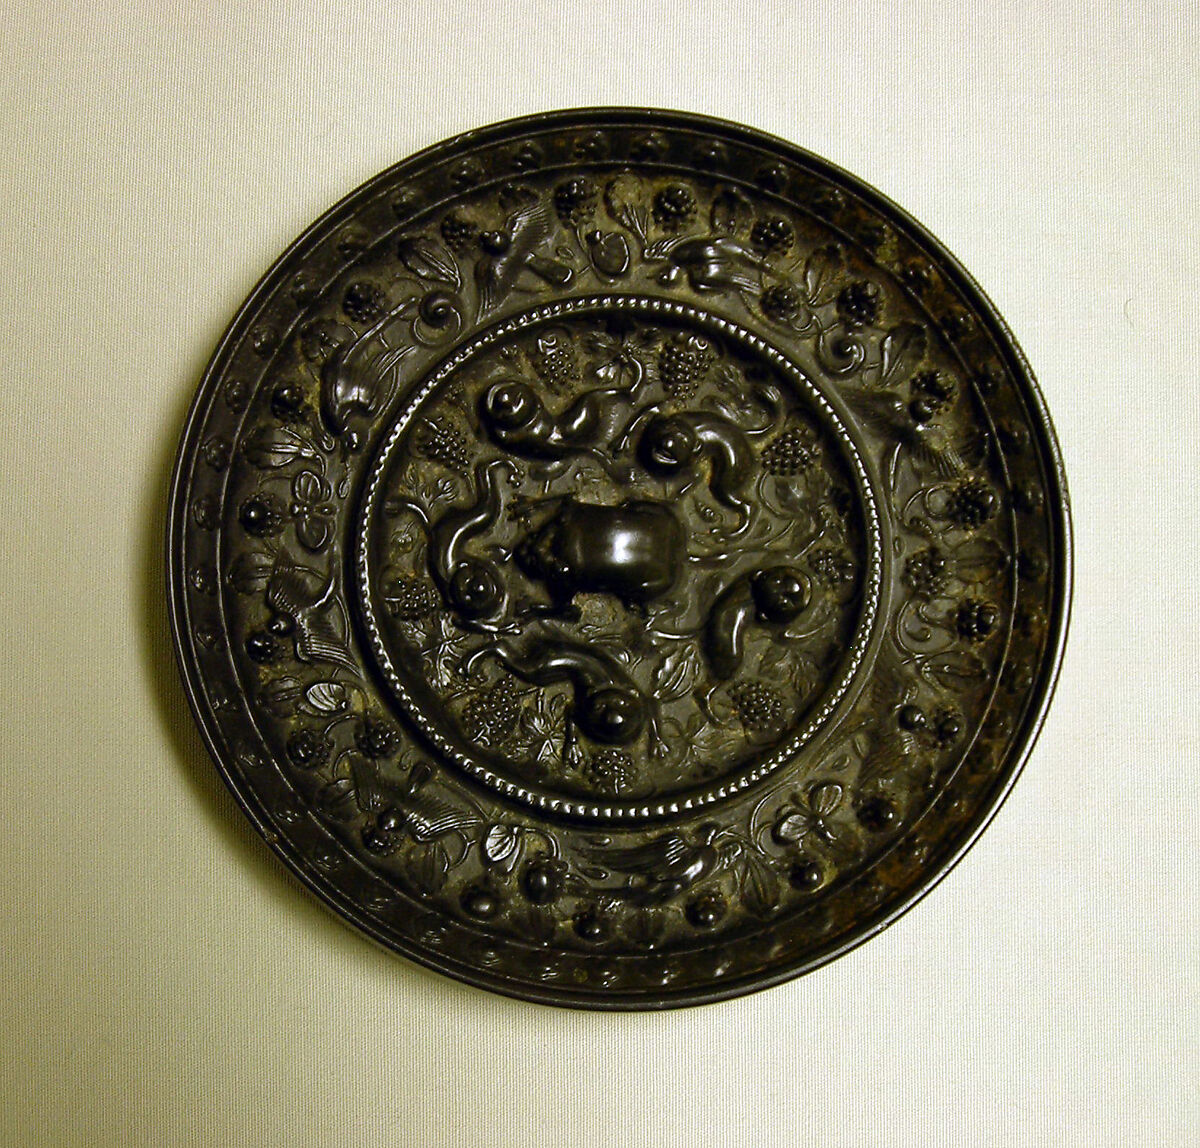 Mirror with fantastic animals amid grape vines, Bronze with black patina, China 